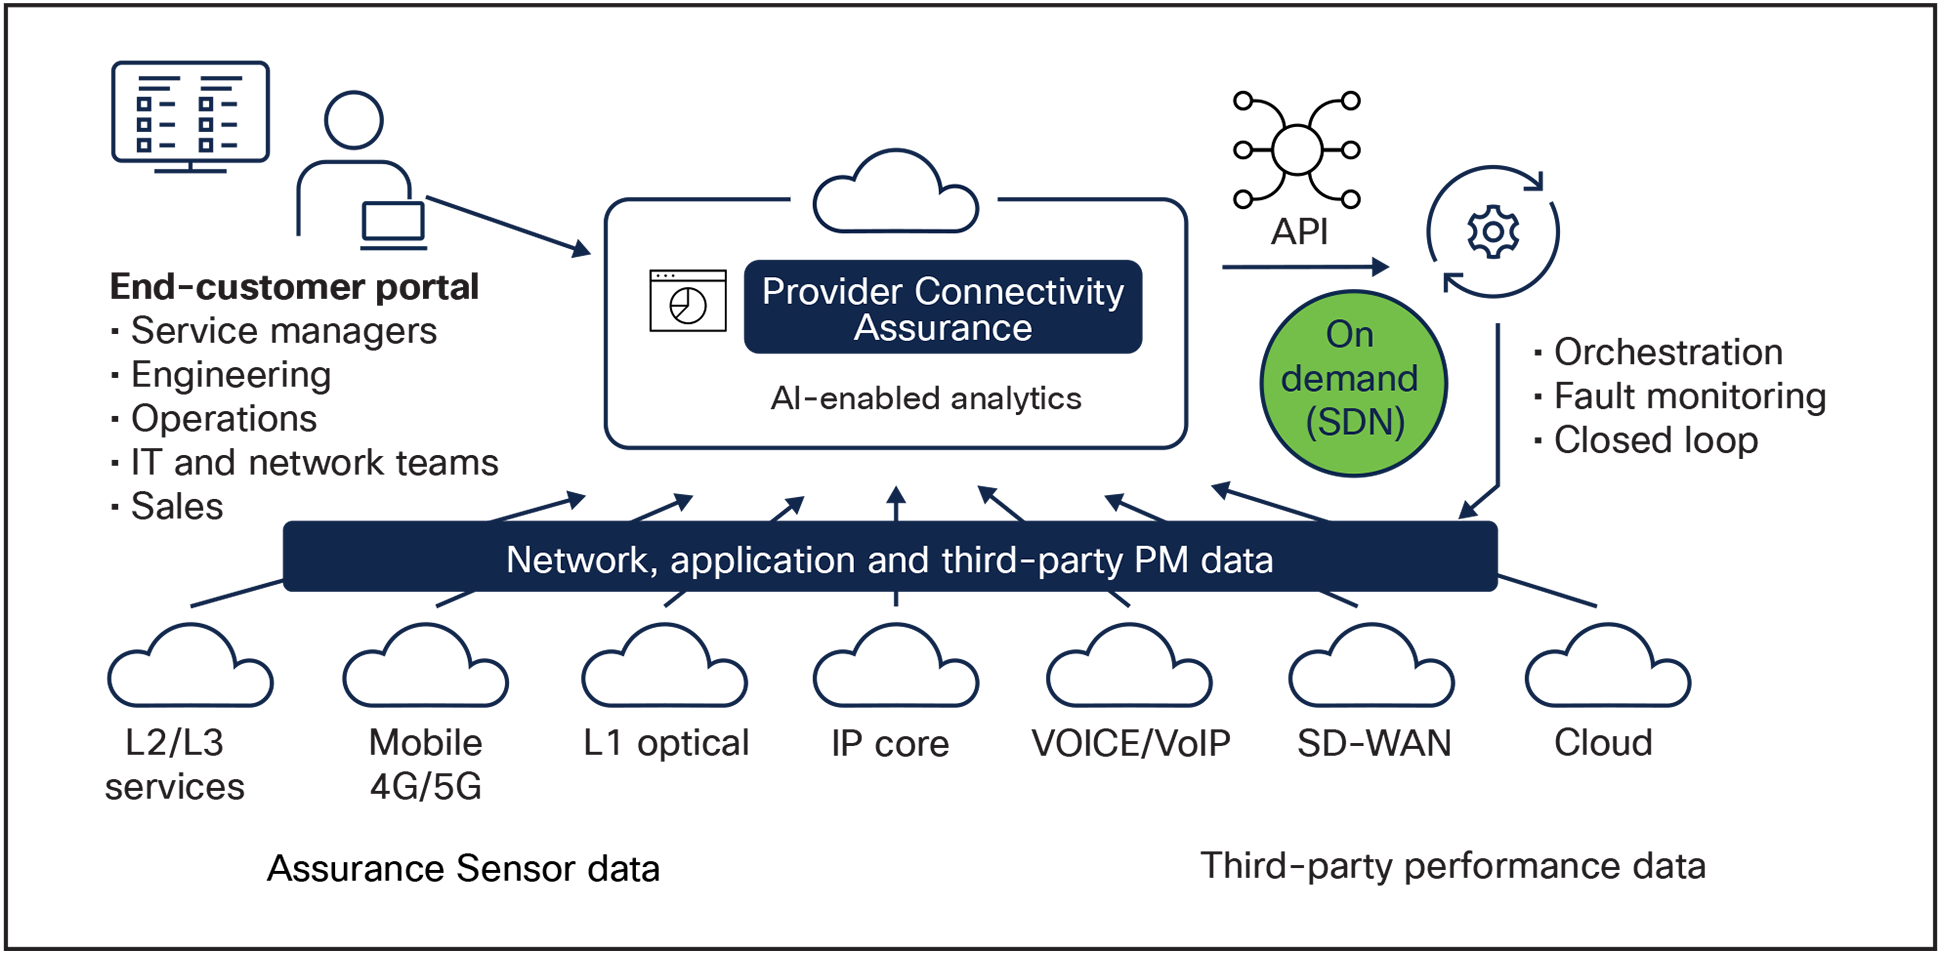 Cisco Provider Connectivity Assurance has the right feature set to differentiate and upsell end-customer portals